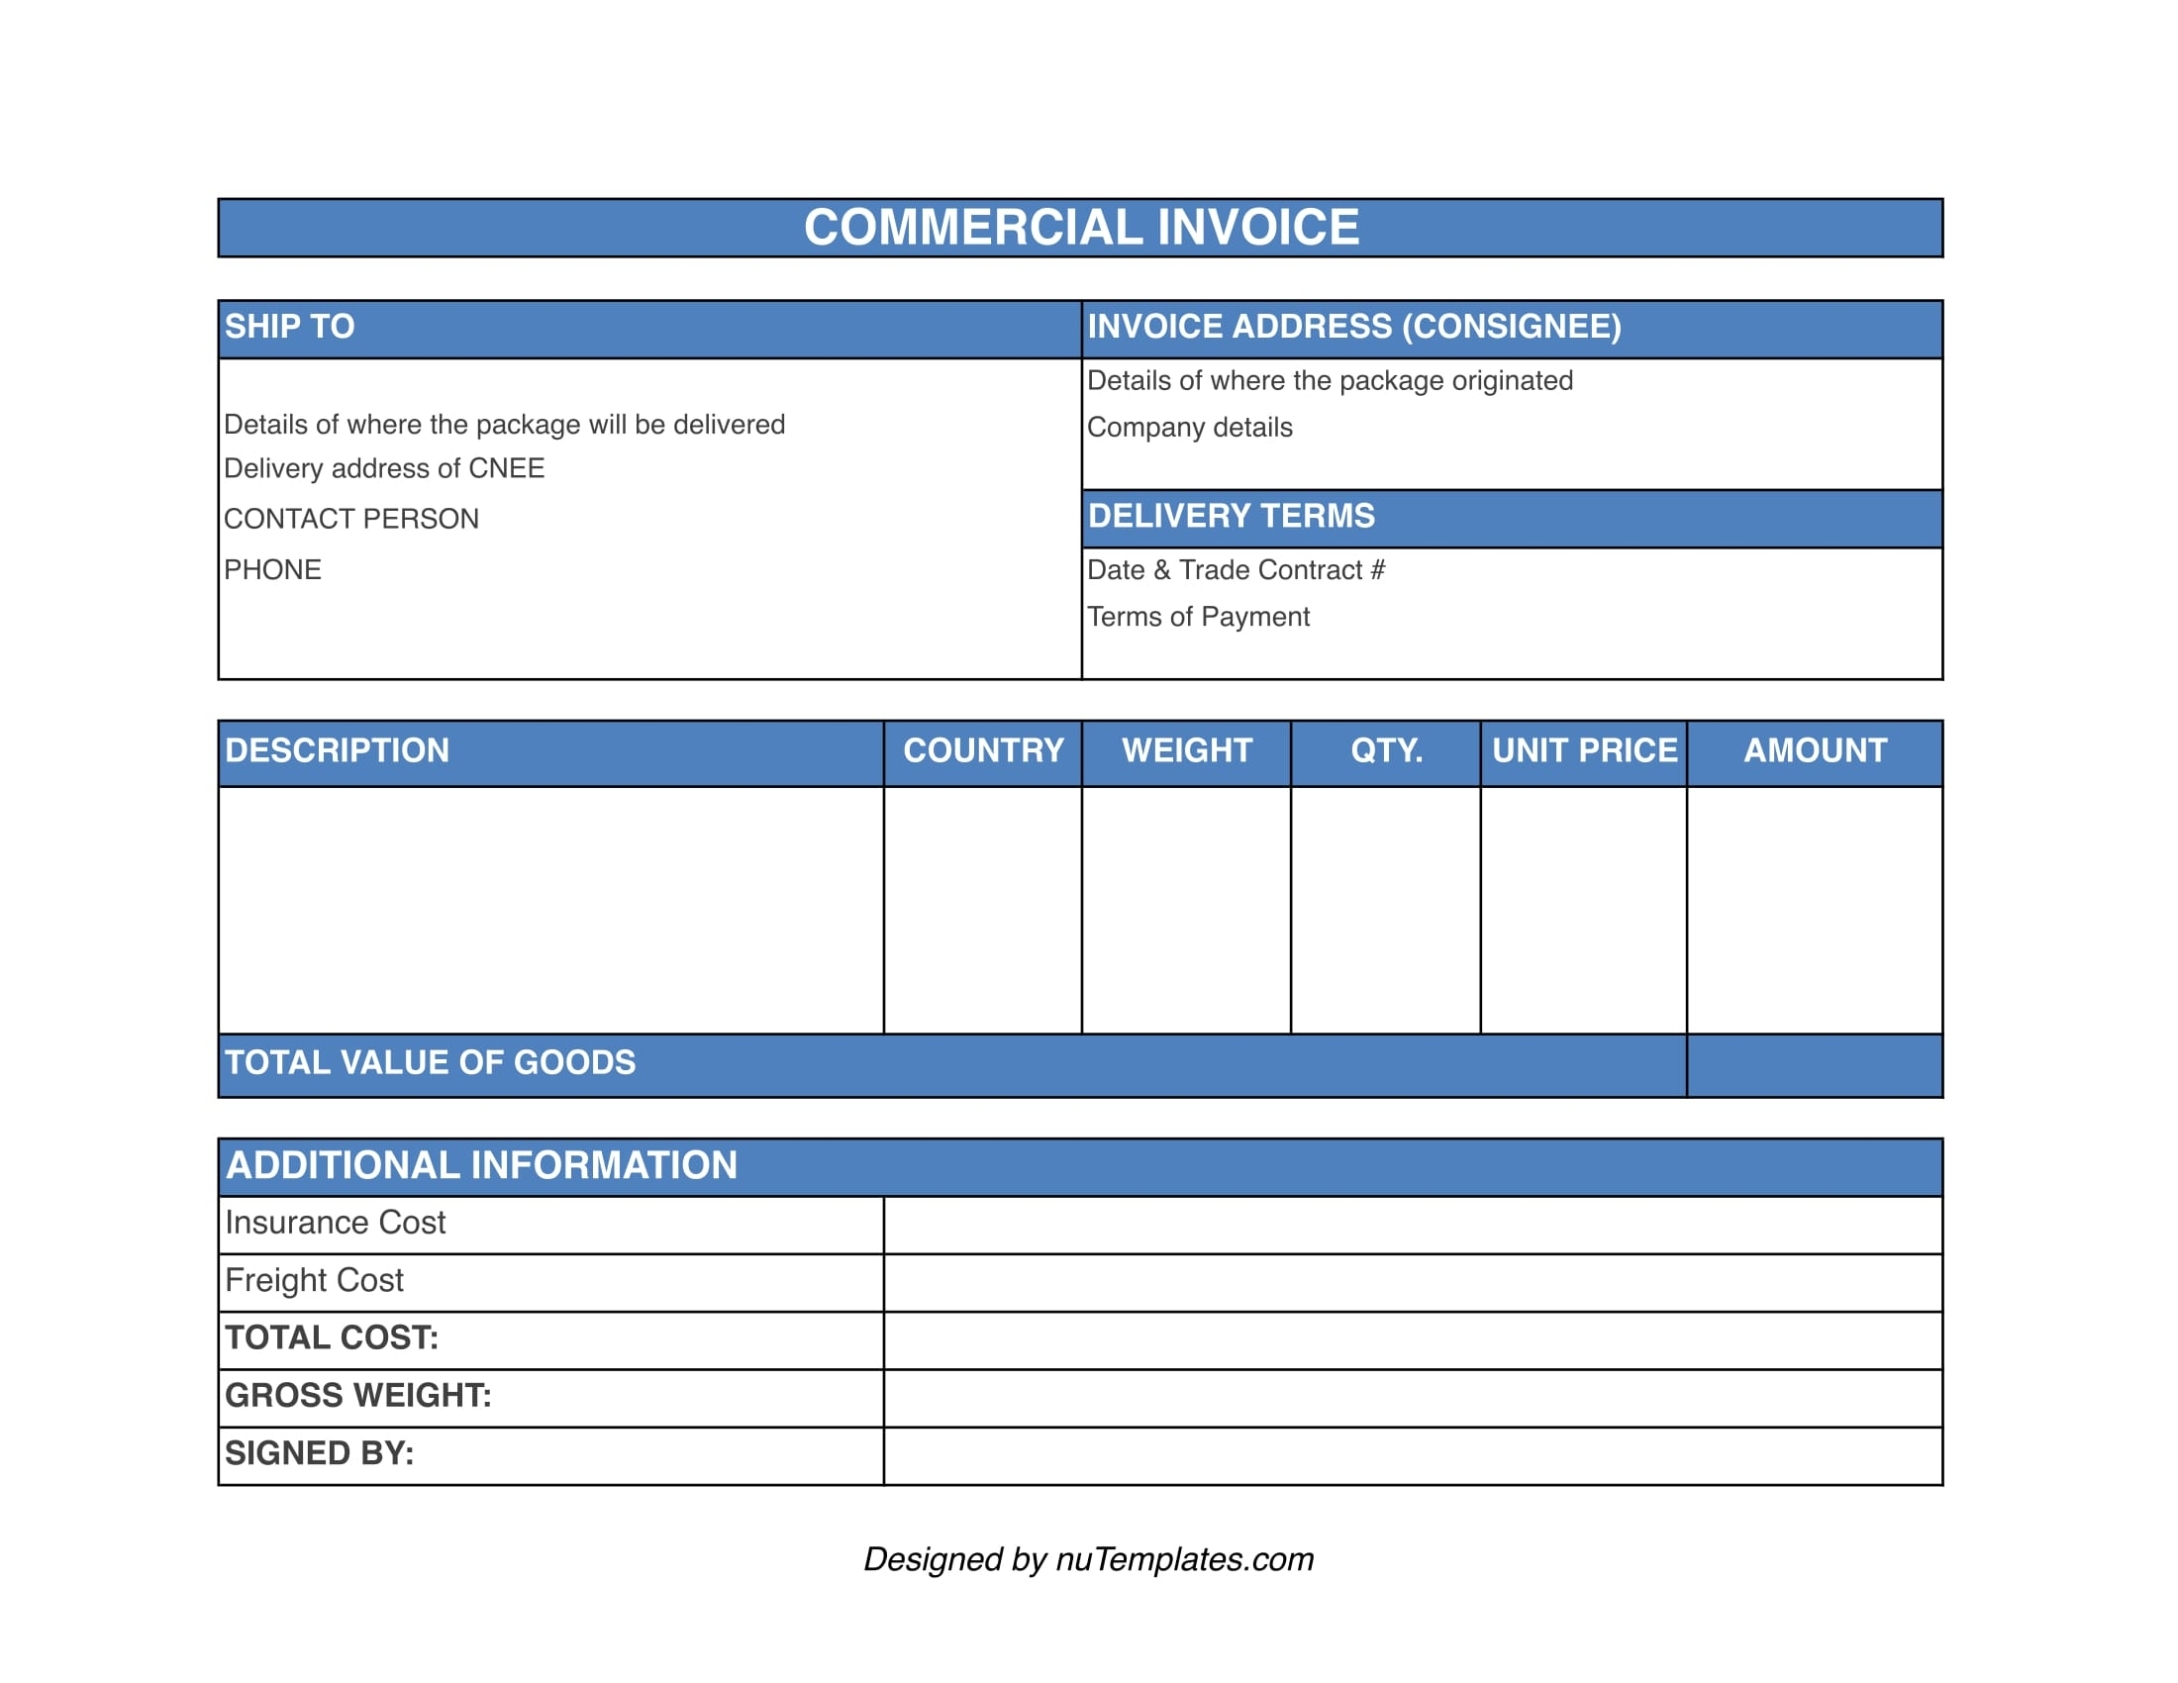 Commercial Invoice Template – Commercial Invoices | Nutemplates Within Commercial Invoice Template Word Doc